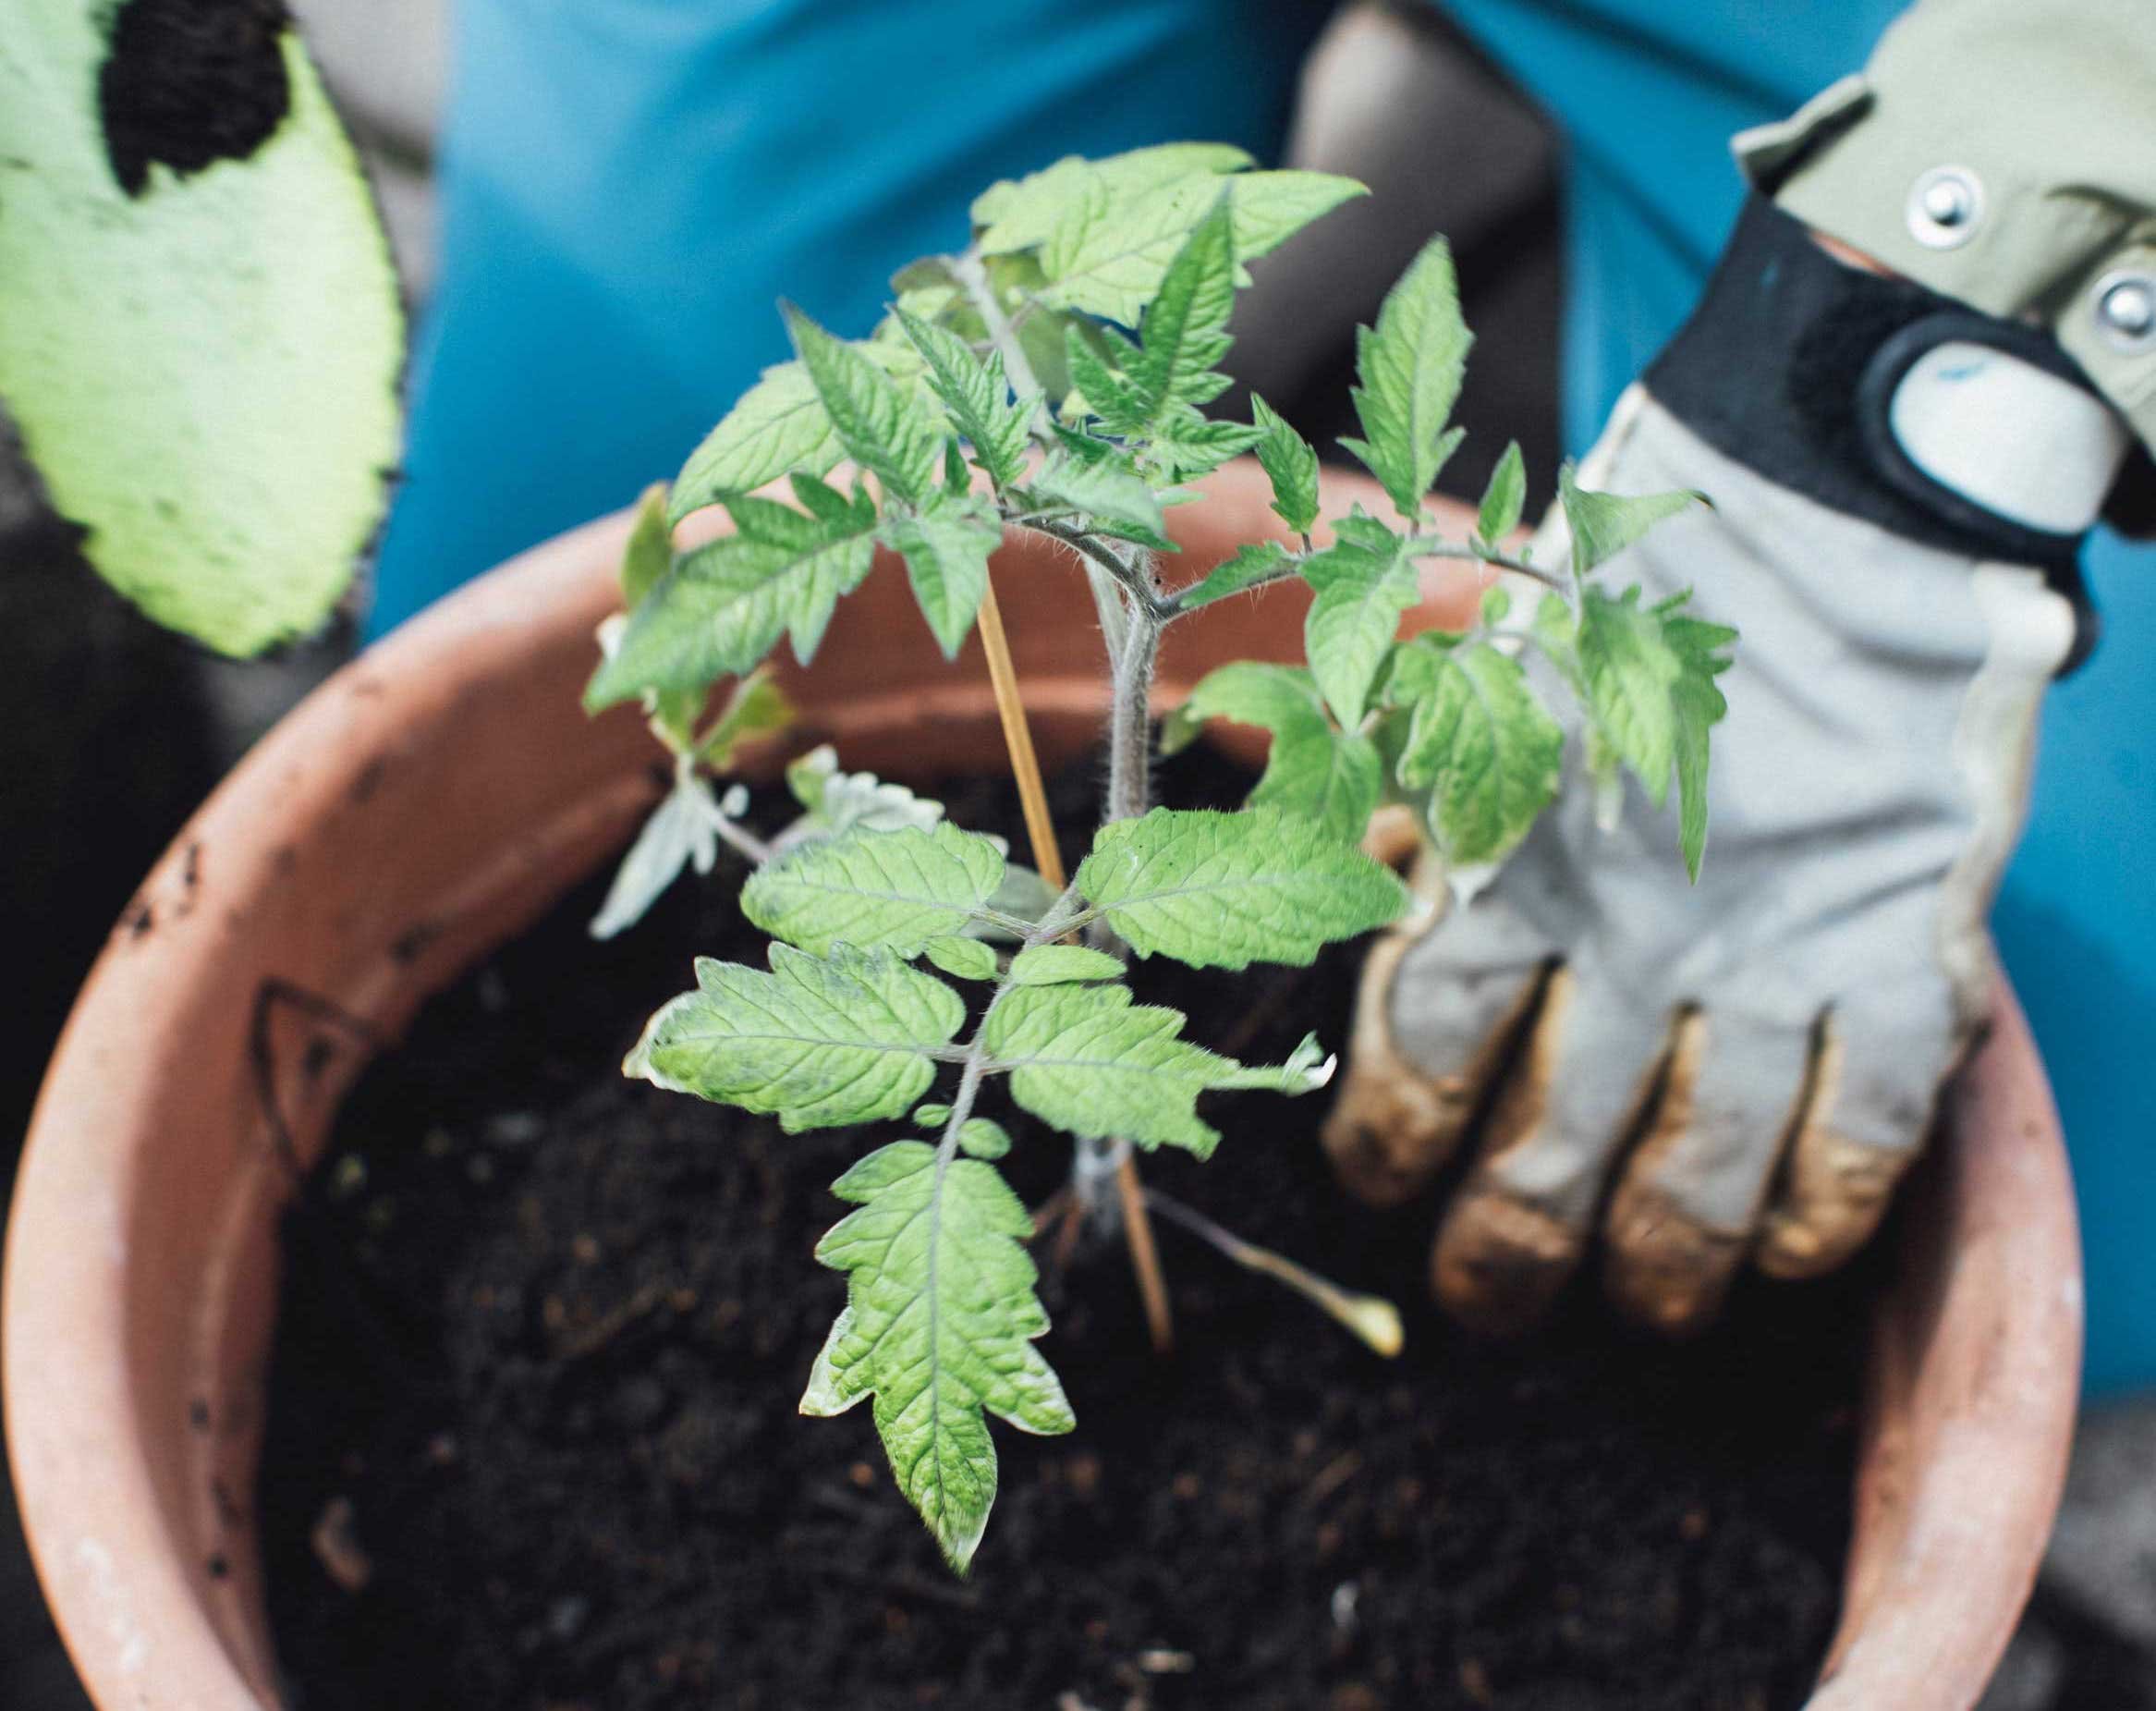 Young tomato plant being transplanted into a terra cotta pot